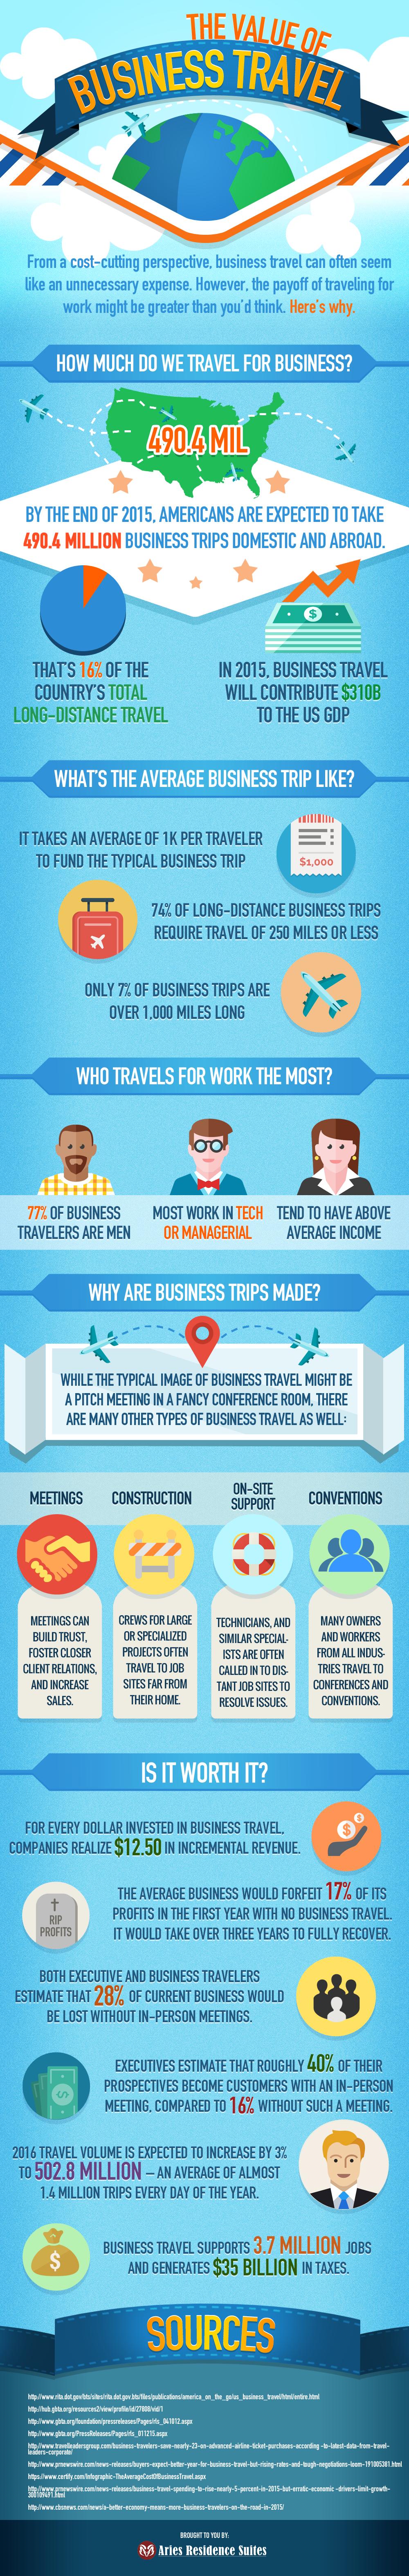 The Value of Business Travel